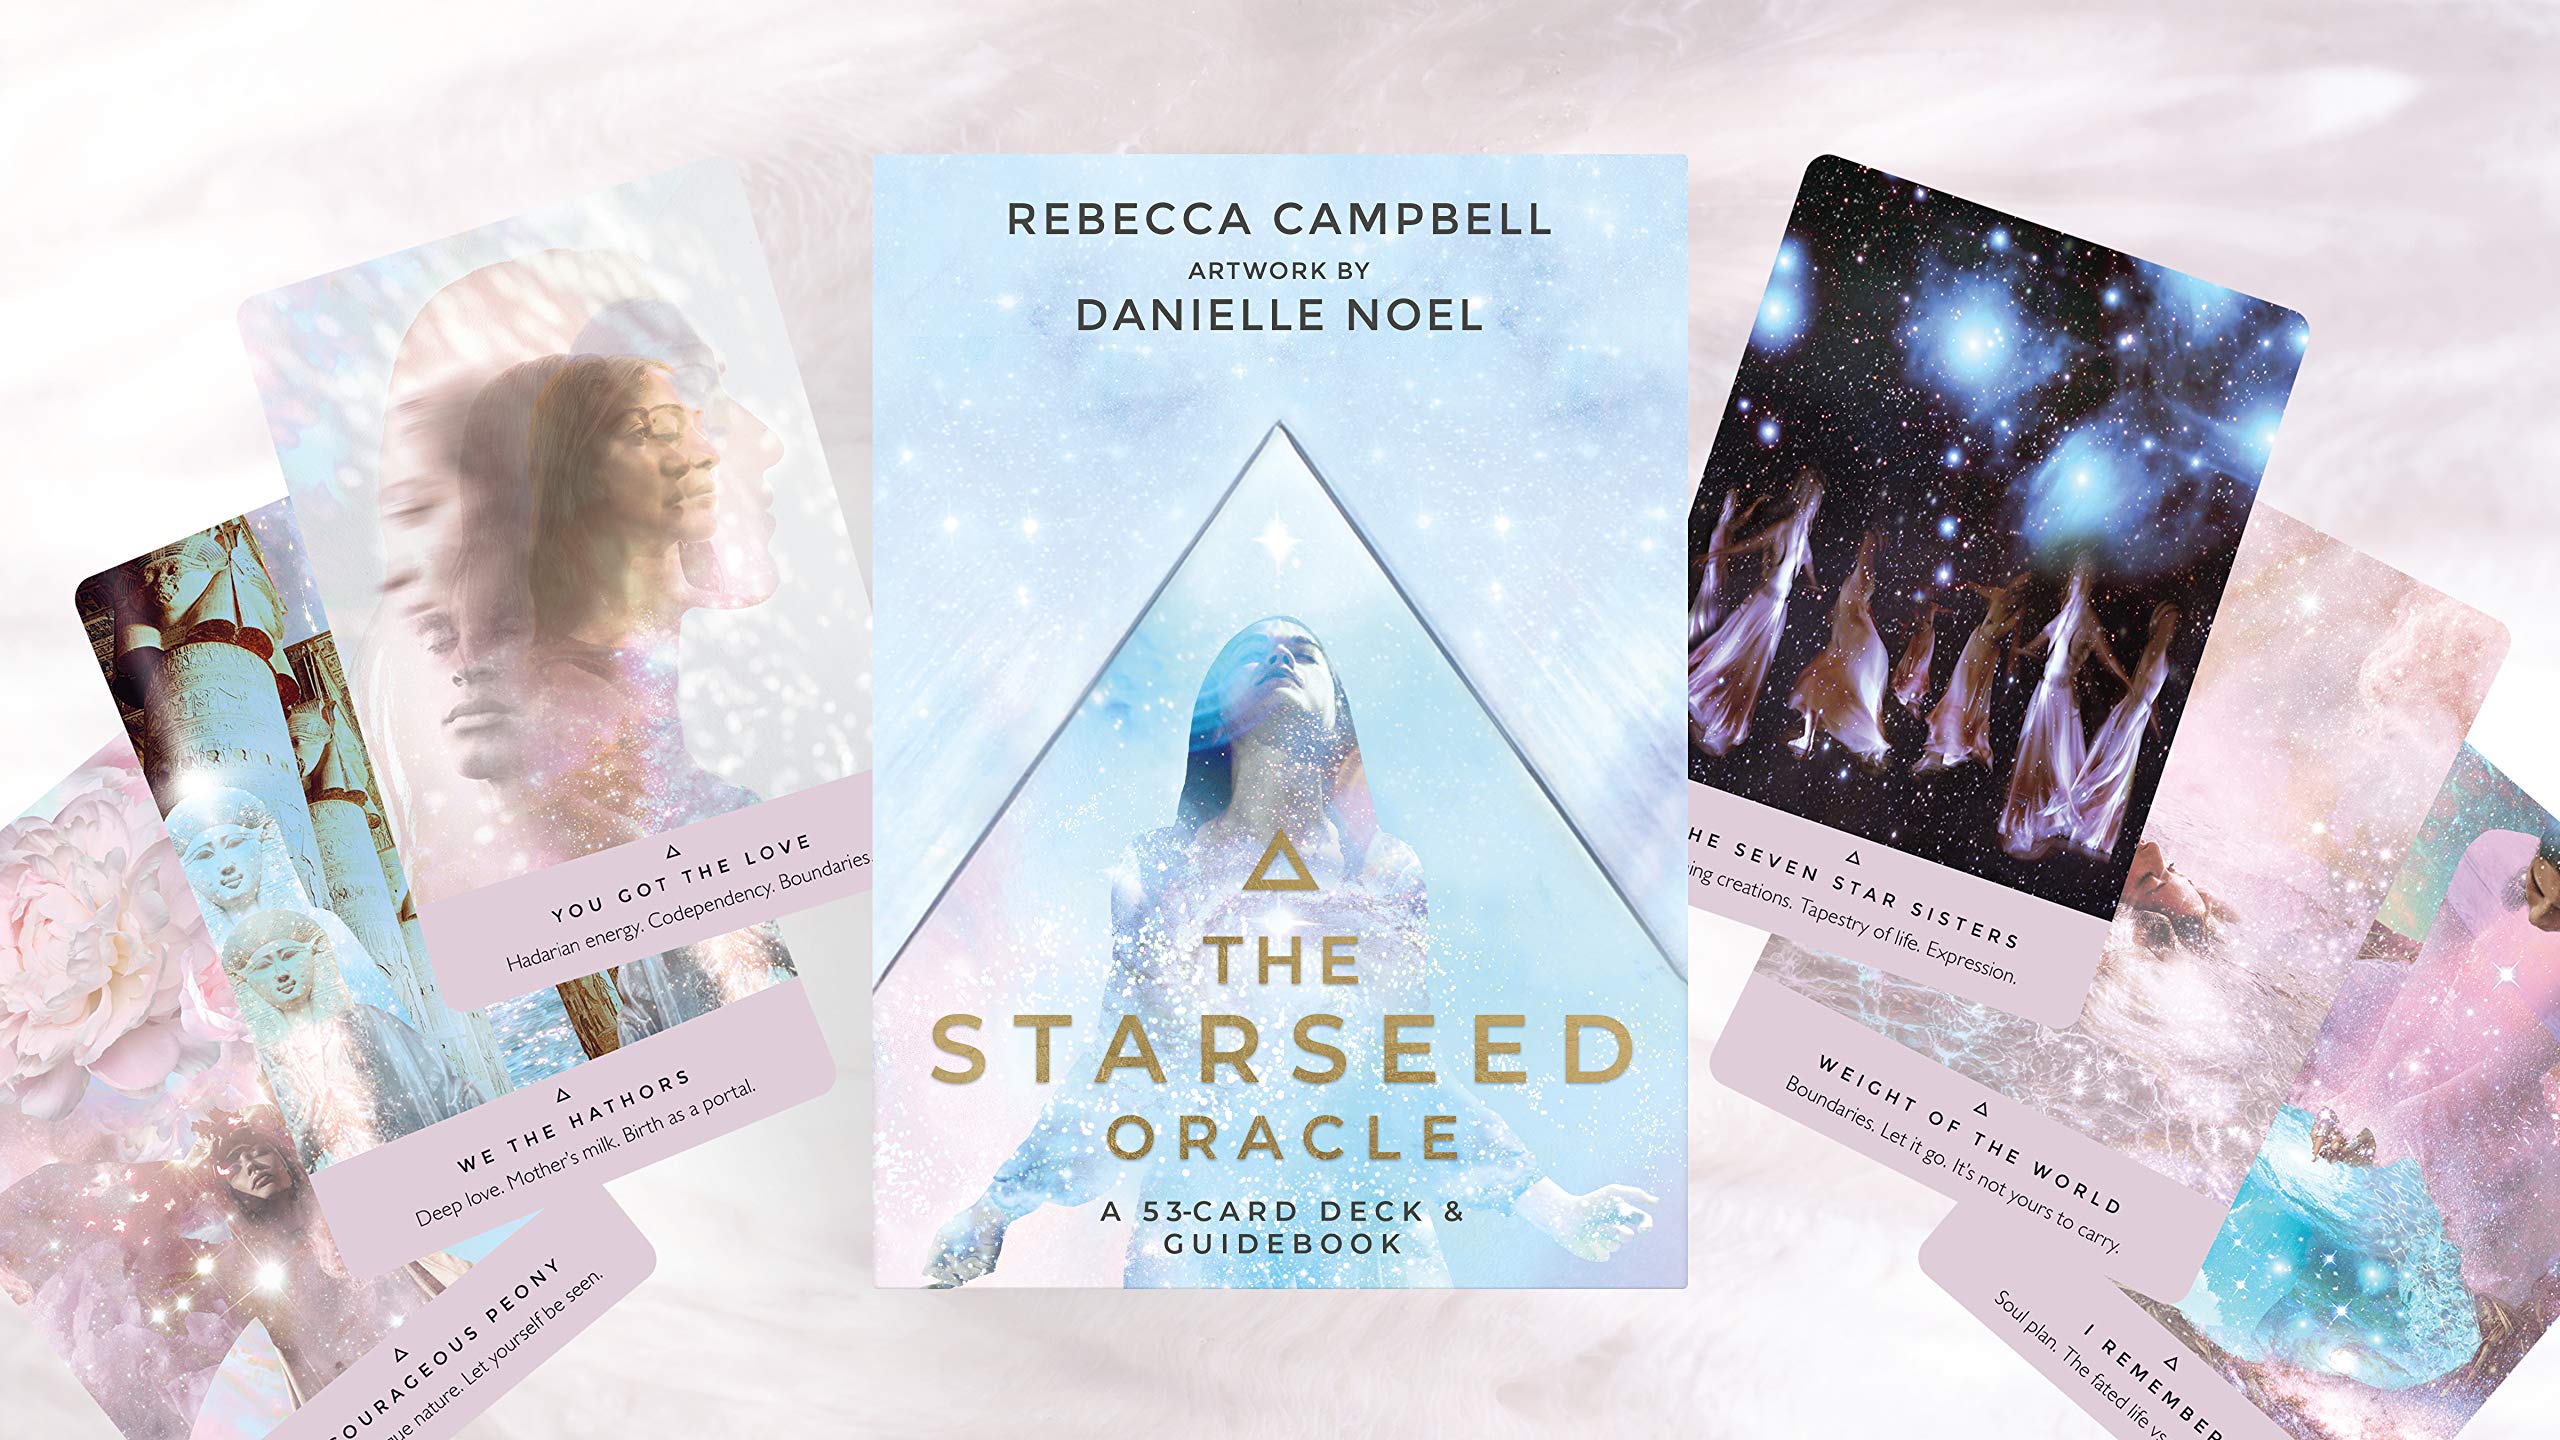 The Starseed Oracle; Rebecca Campbell, artwork by Danielle Noel